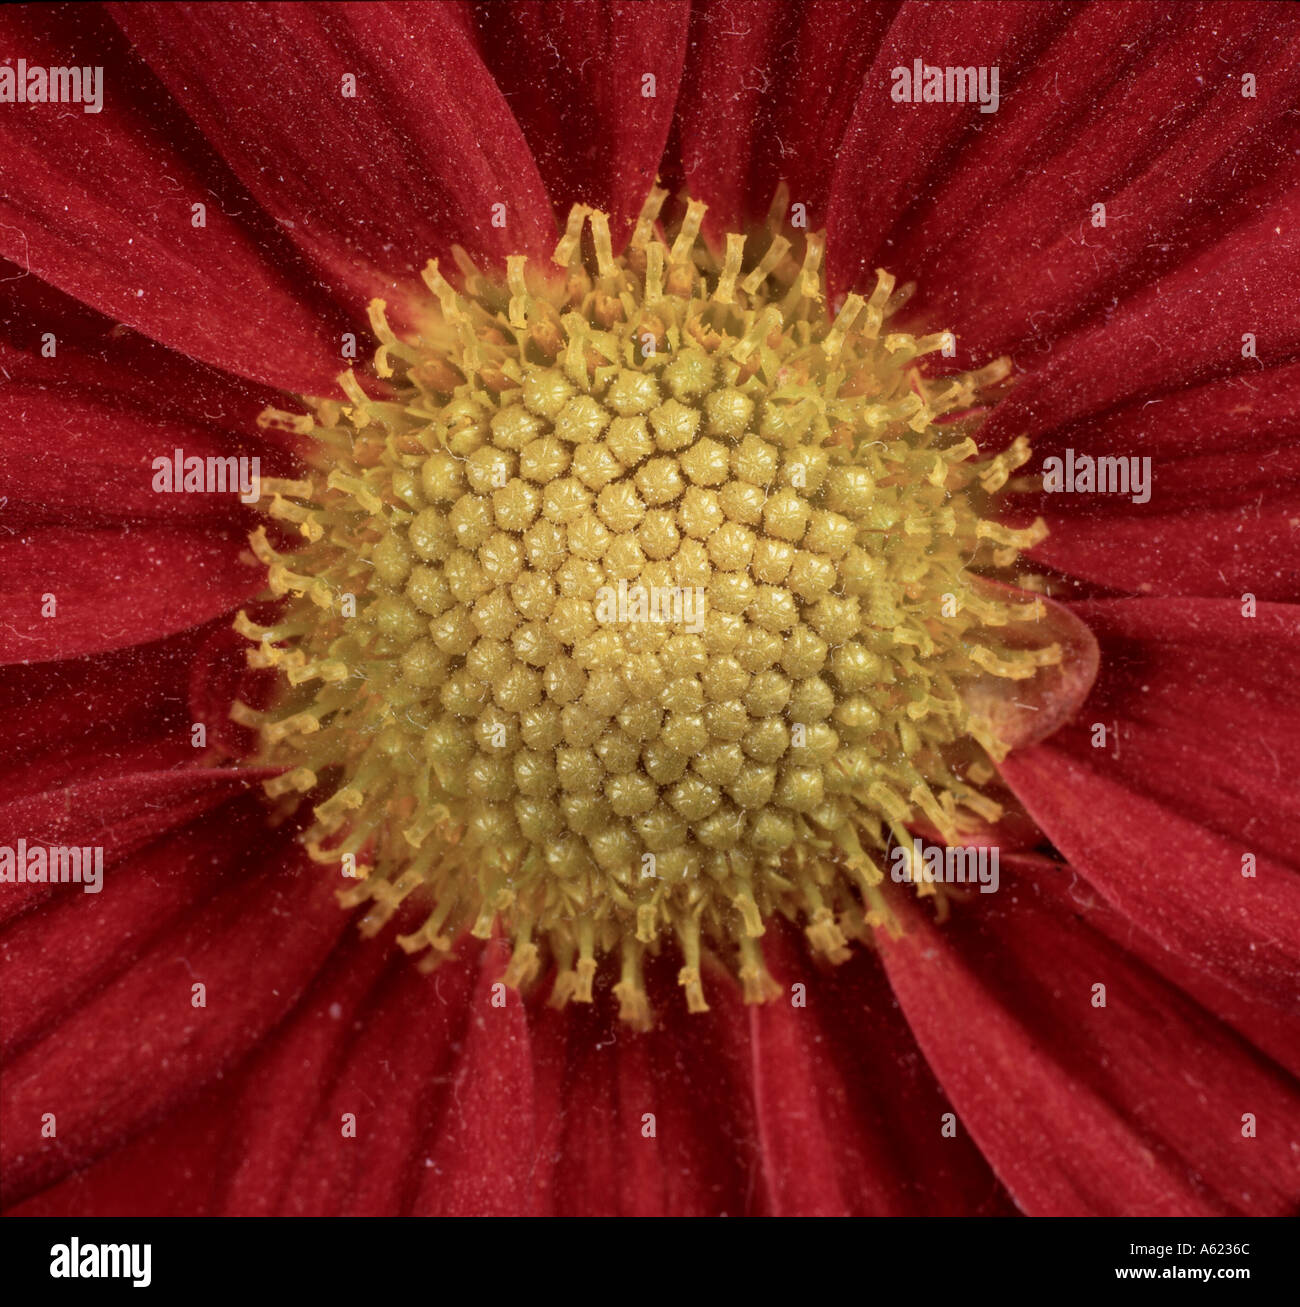 Disc florets at the centre of a Chrysanthemum flower Stock Photo